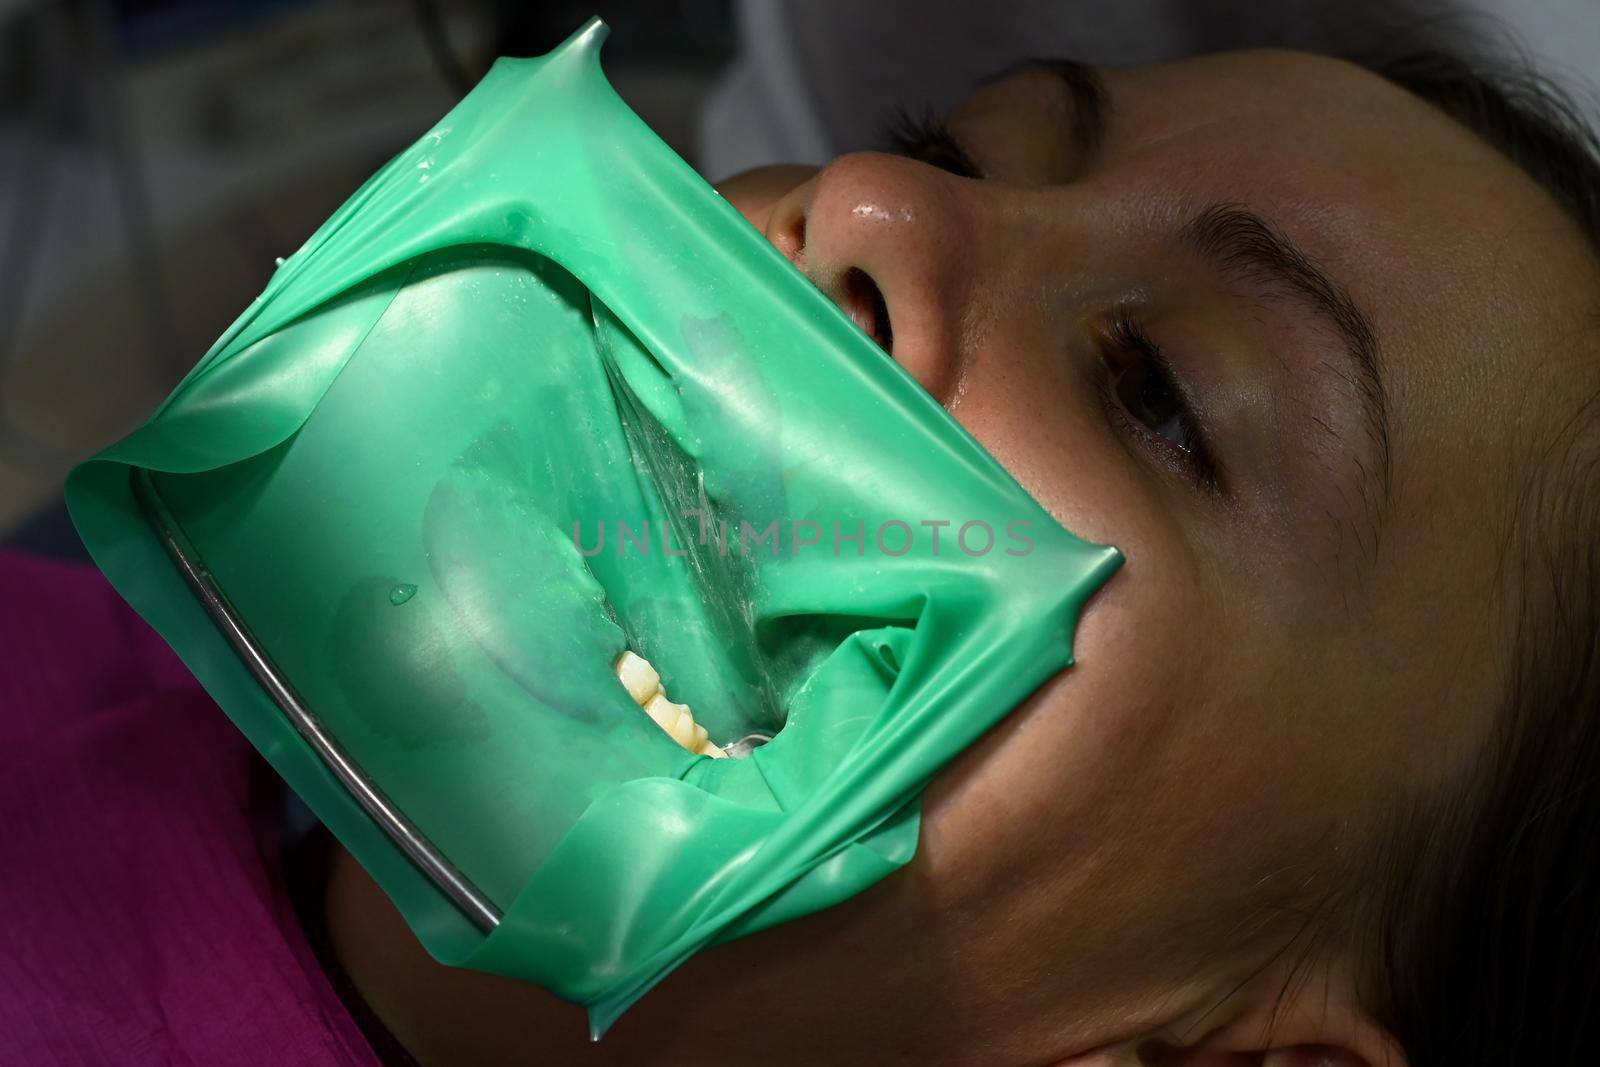 A woman at a dentist's appointment, a dentist uses a rubber dam and dental tools for treatment. by Niko_Cingaryuk